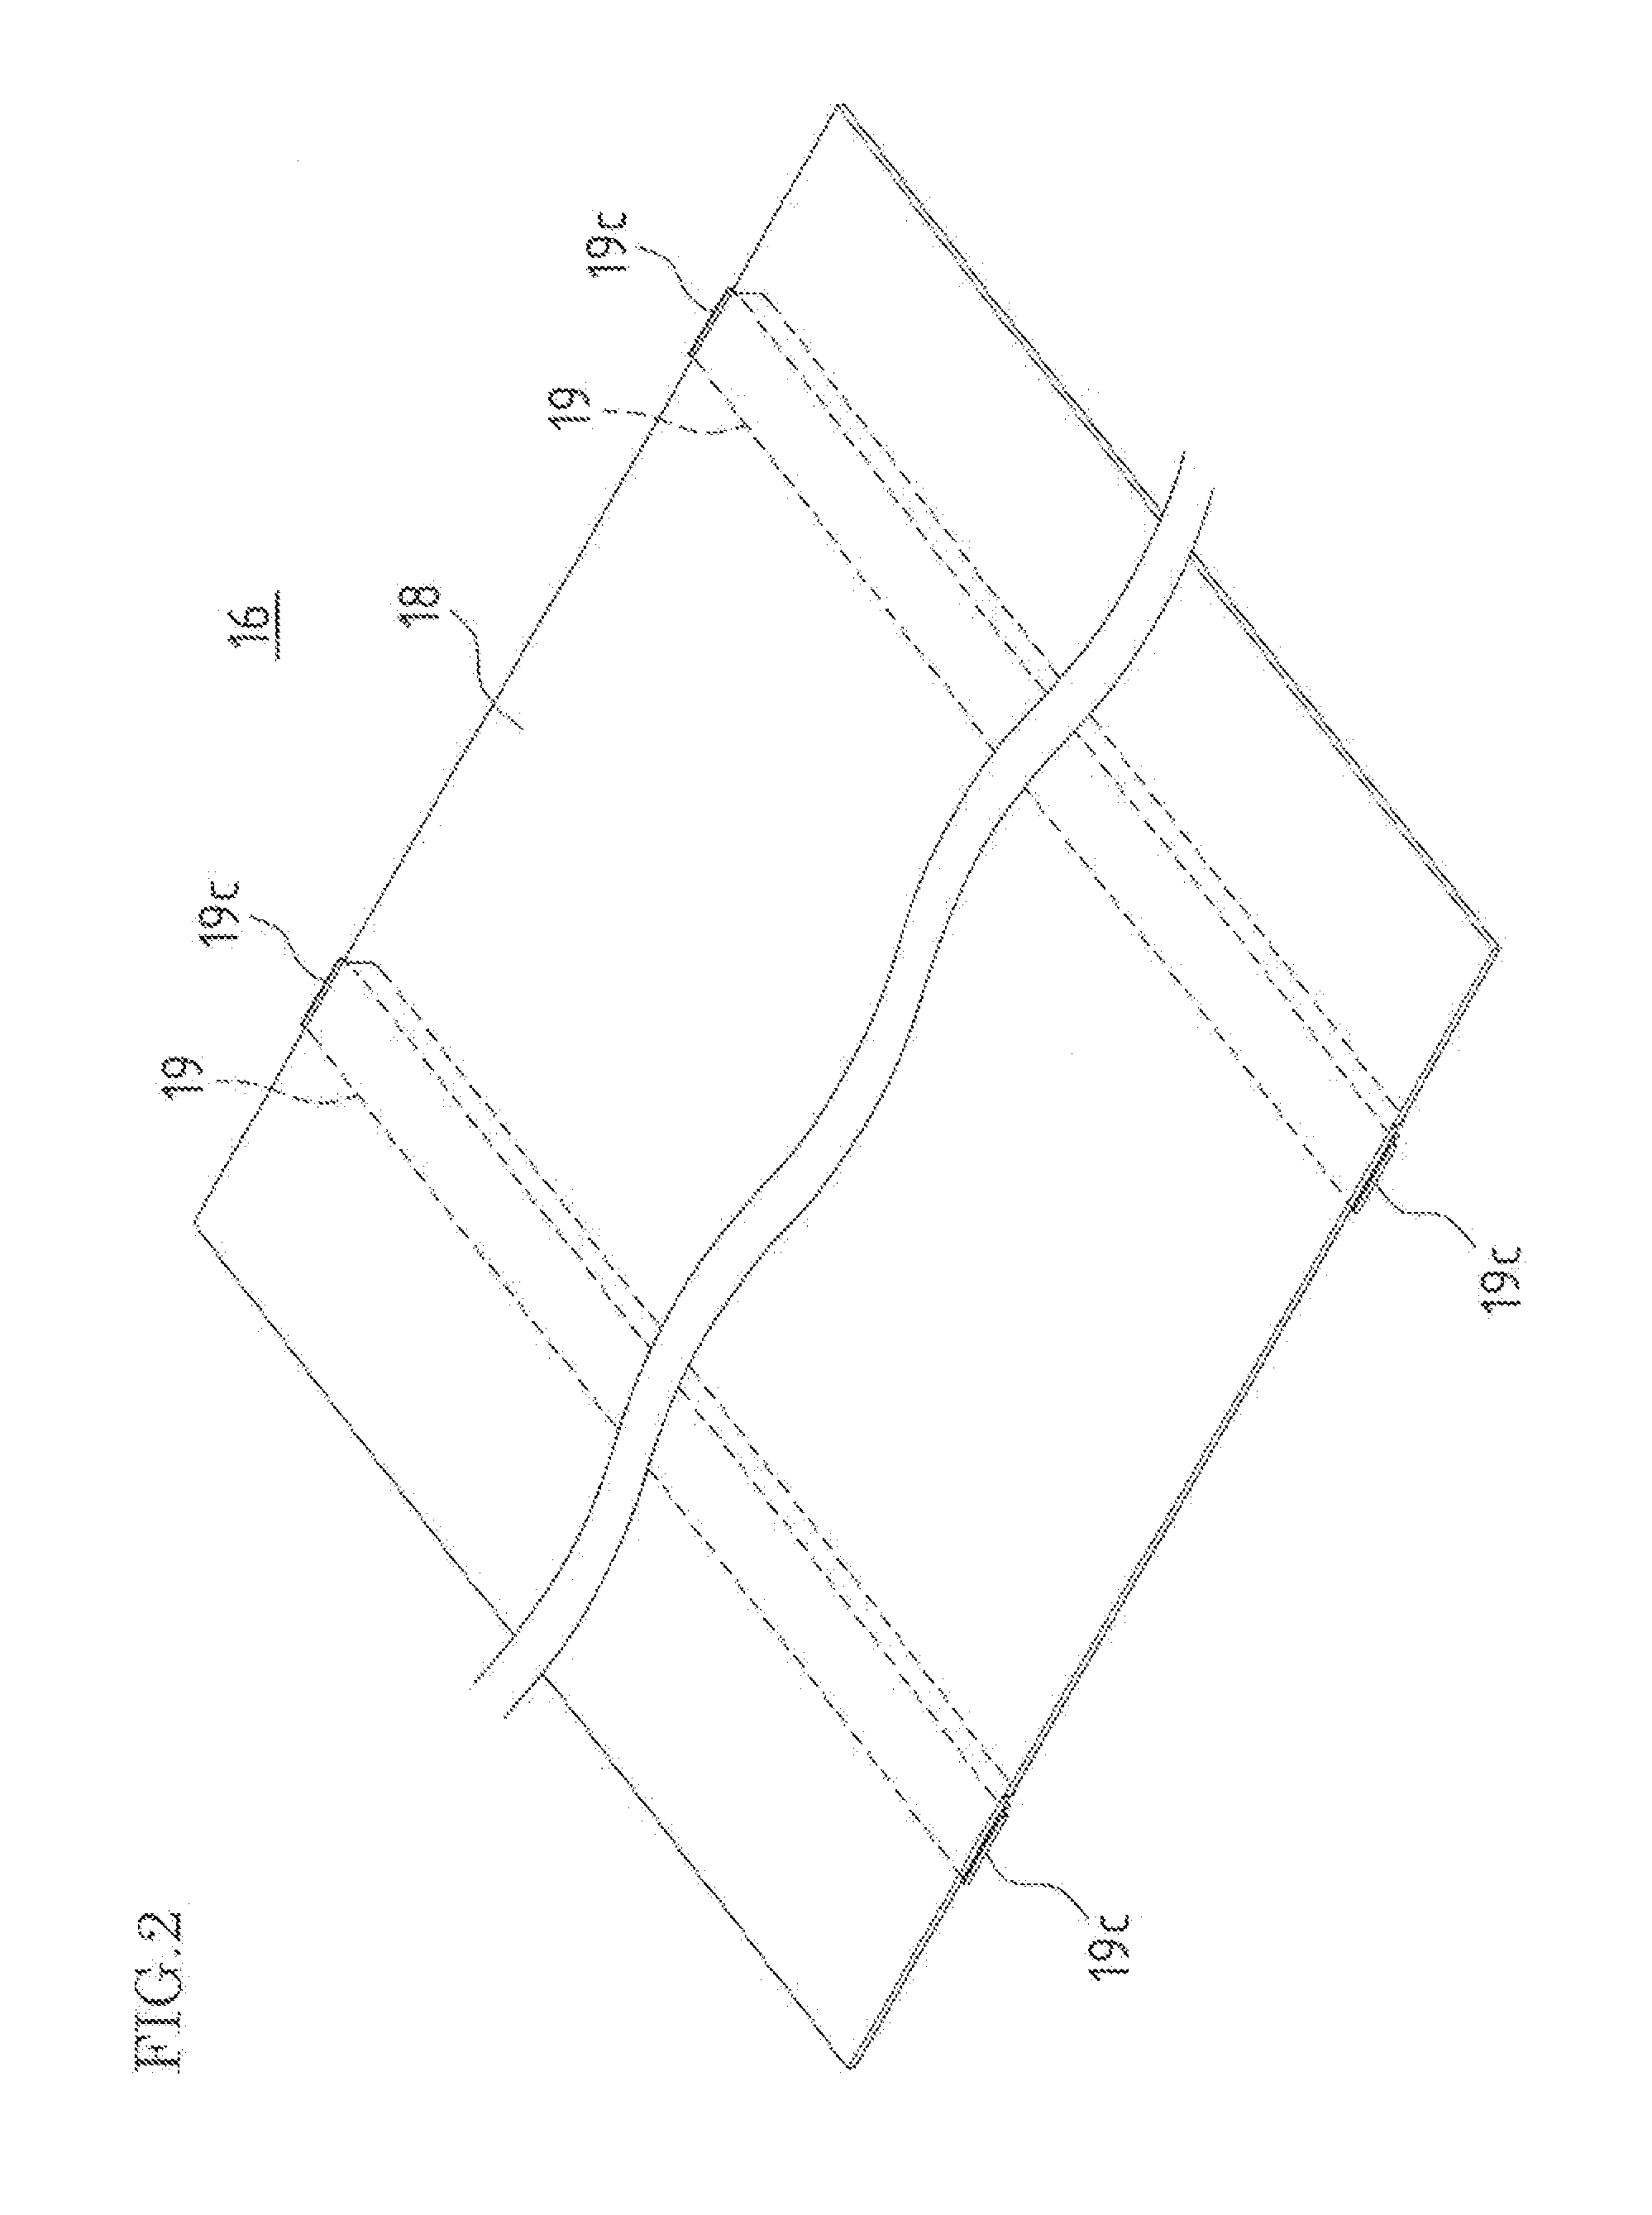 Structural object supporting structure, structural object mount, method for installing structural object using the mount, and solar photovoltaic system